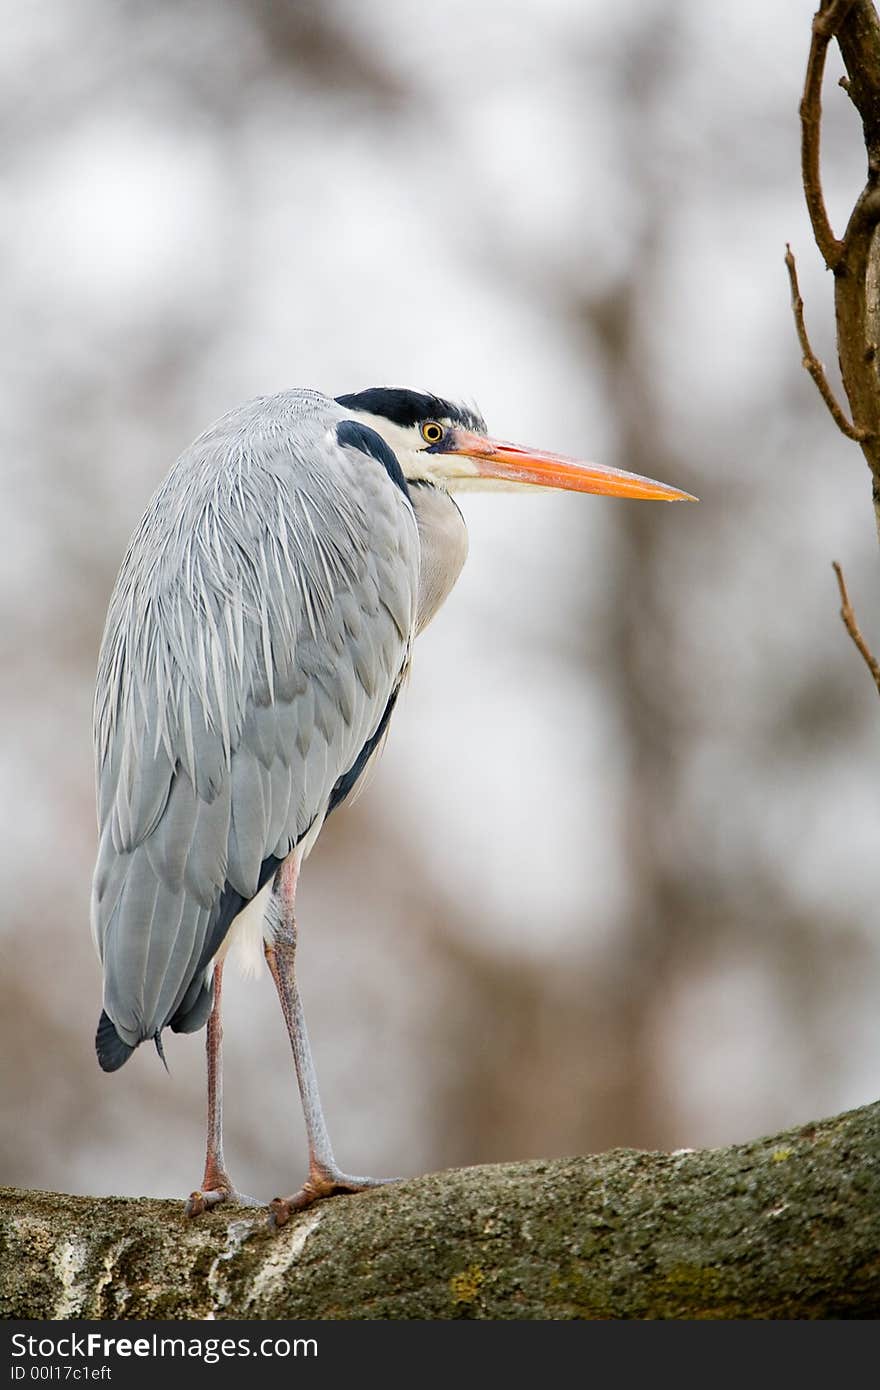 Just a grey heron, sitting on a tree.